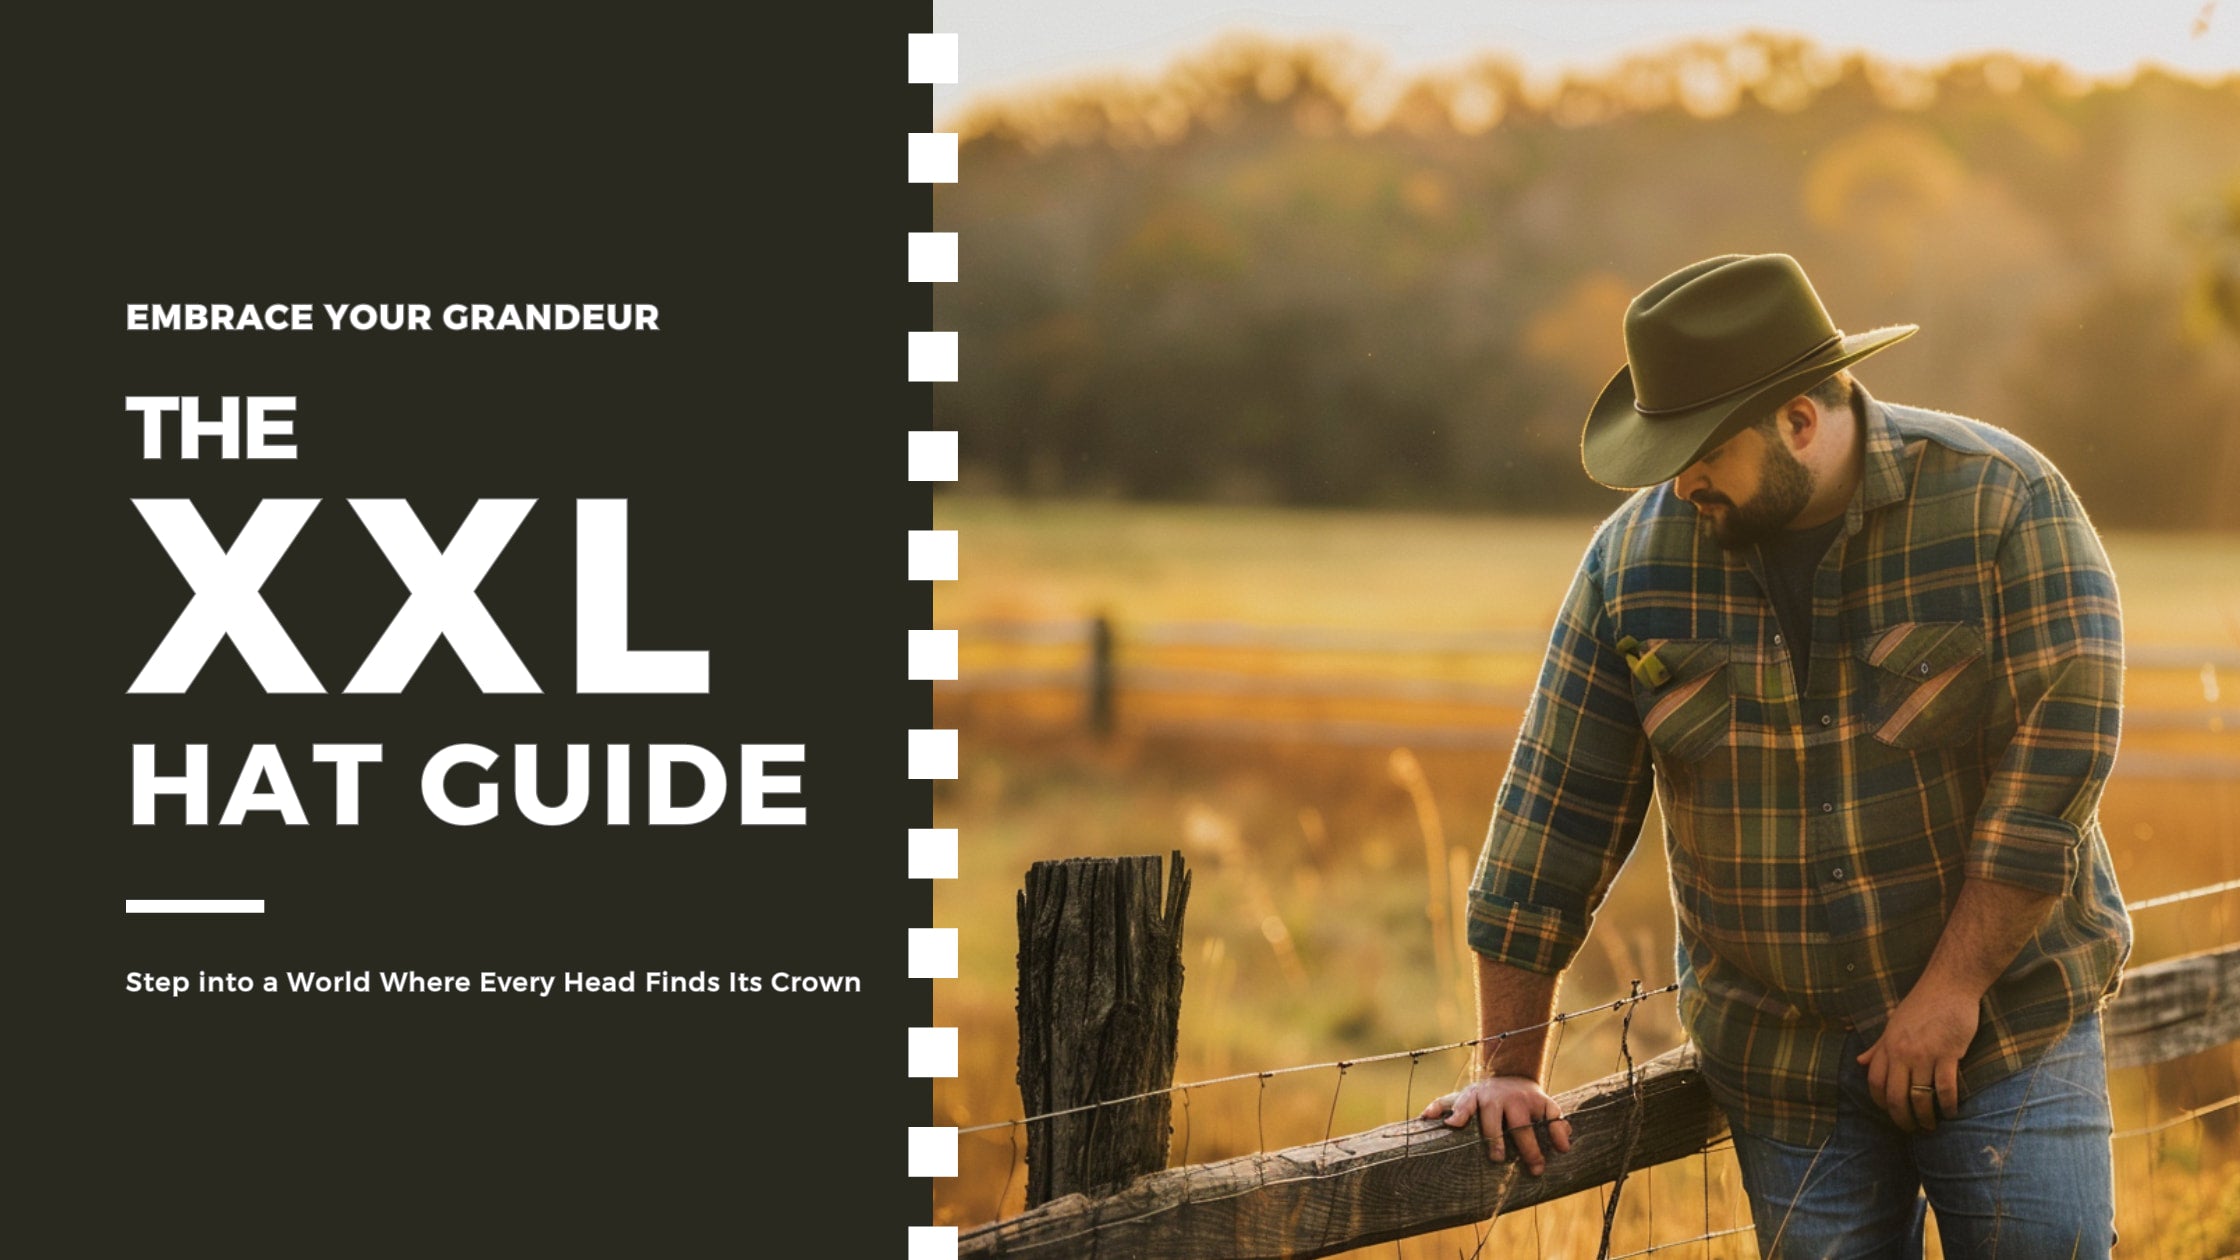 Advertisement for 'The XXL Hat Guide' featuring a man in a plaid shirt and cowboy hat leaning on a wooden fence with a serene rural backdrop, conveying the message of hats for every size.